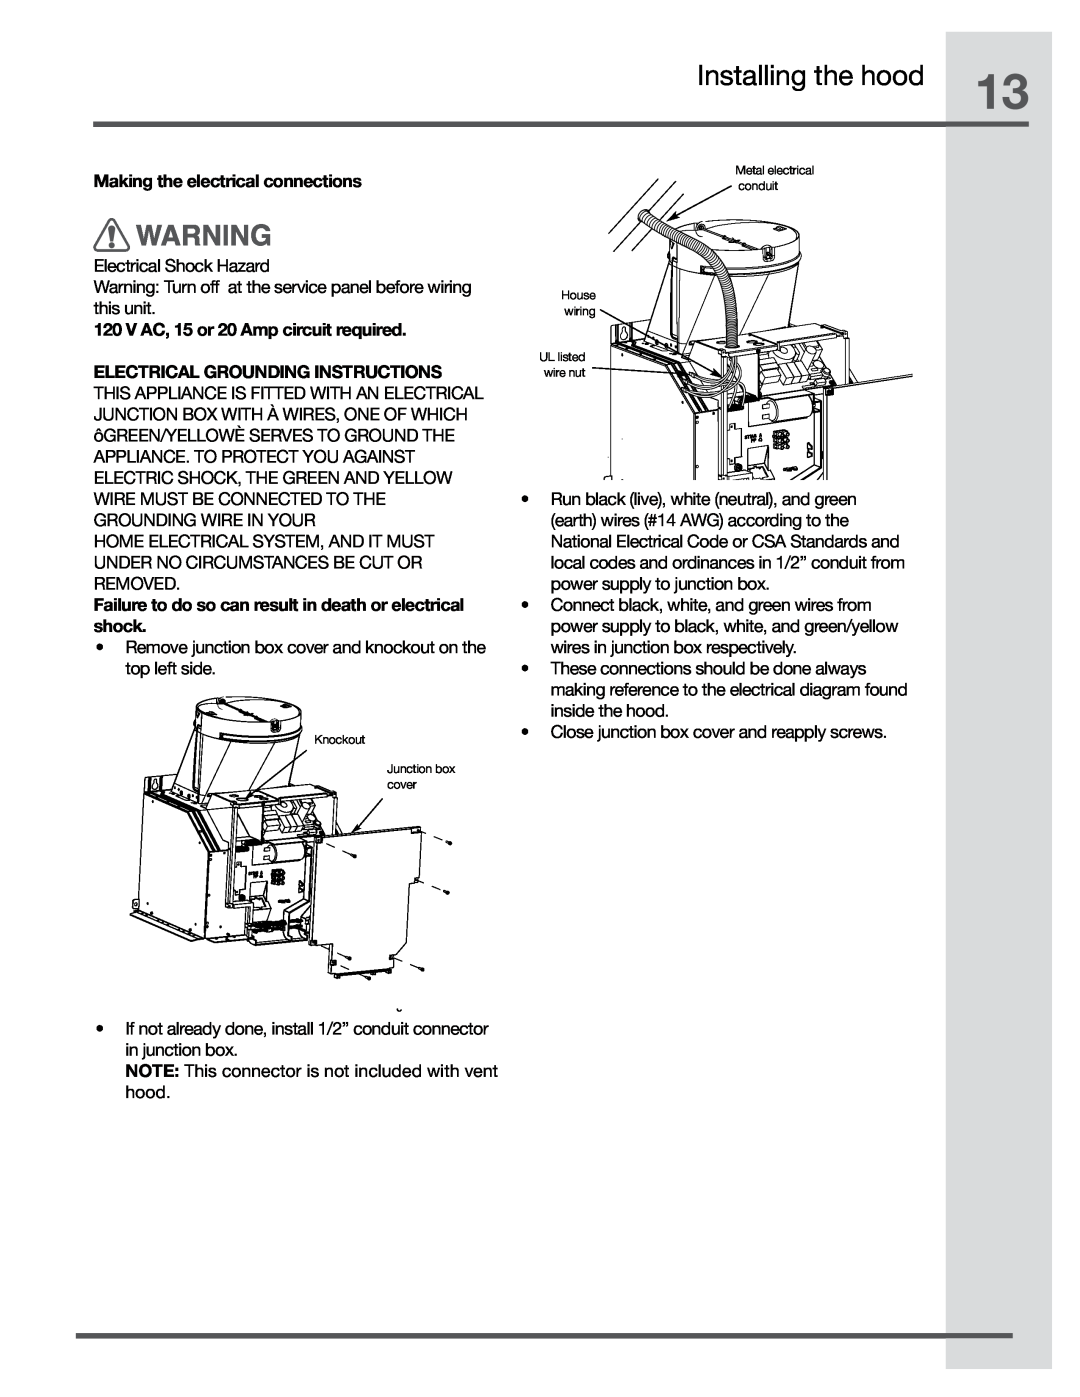 Electrolux RH30WC60GS manual Making the electrical connections, V AC, 15 or 20 Amp circuit required, Installing the hood 